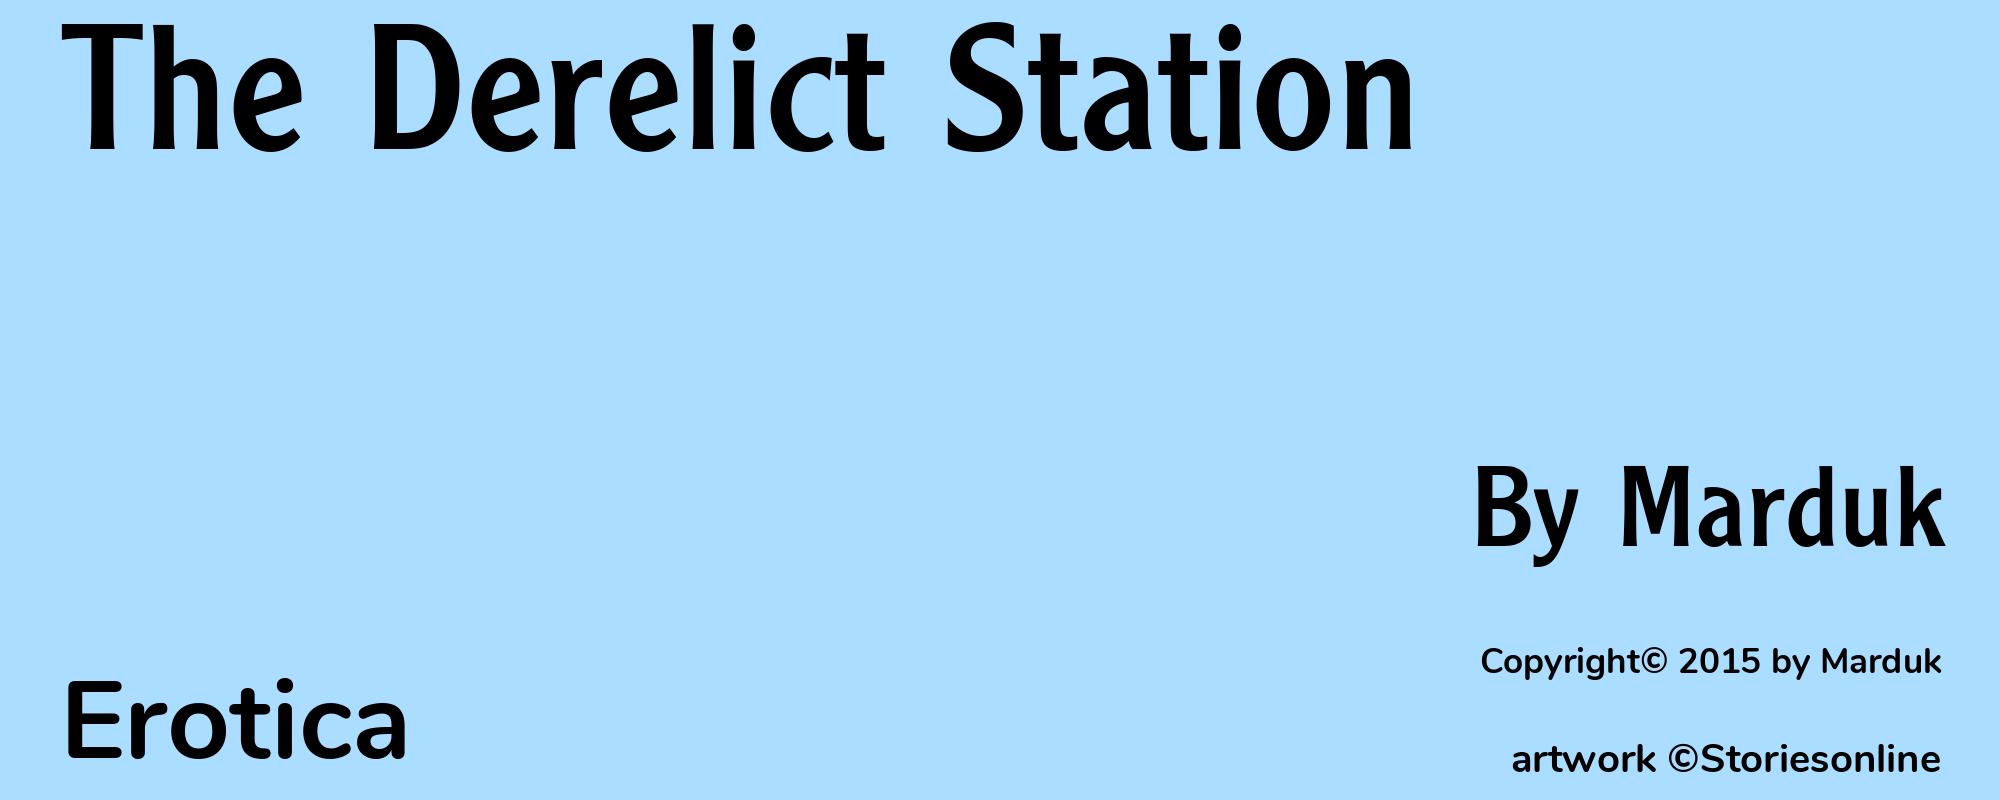 The Derelict Station - Cover